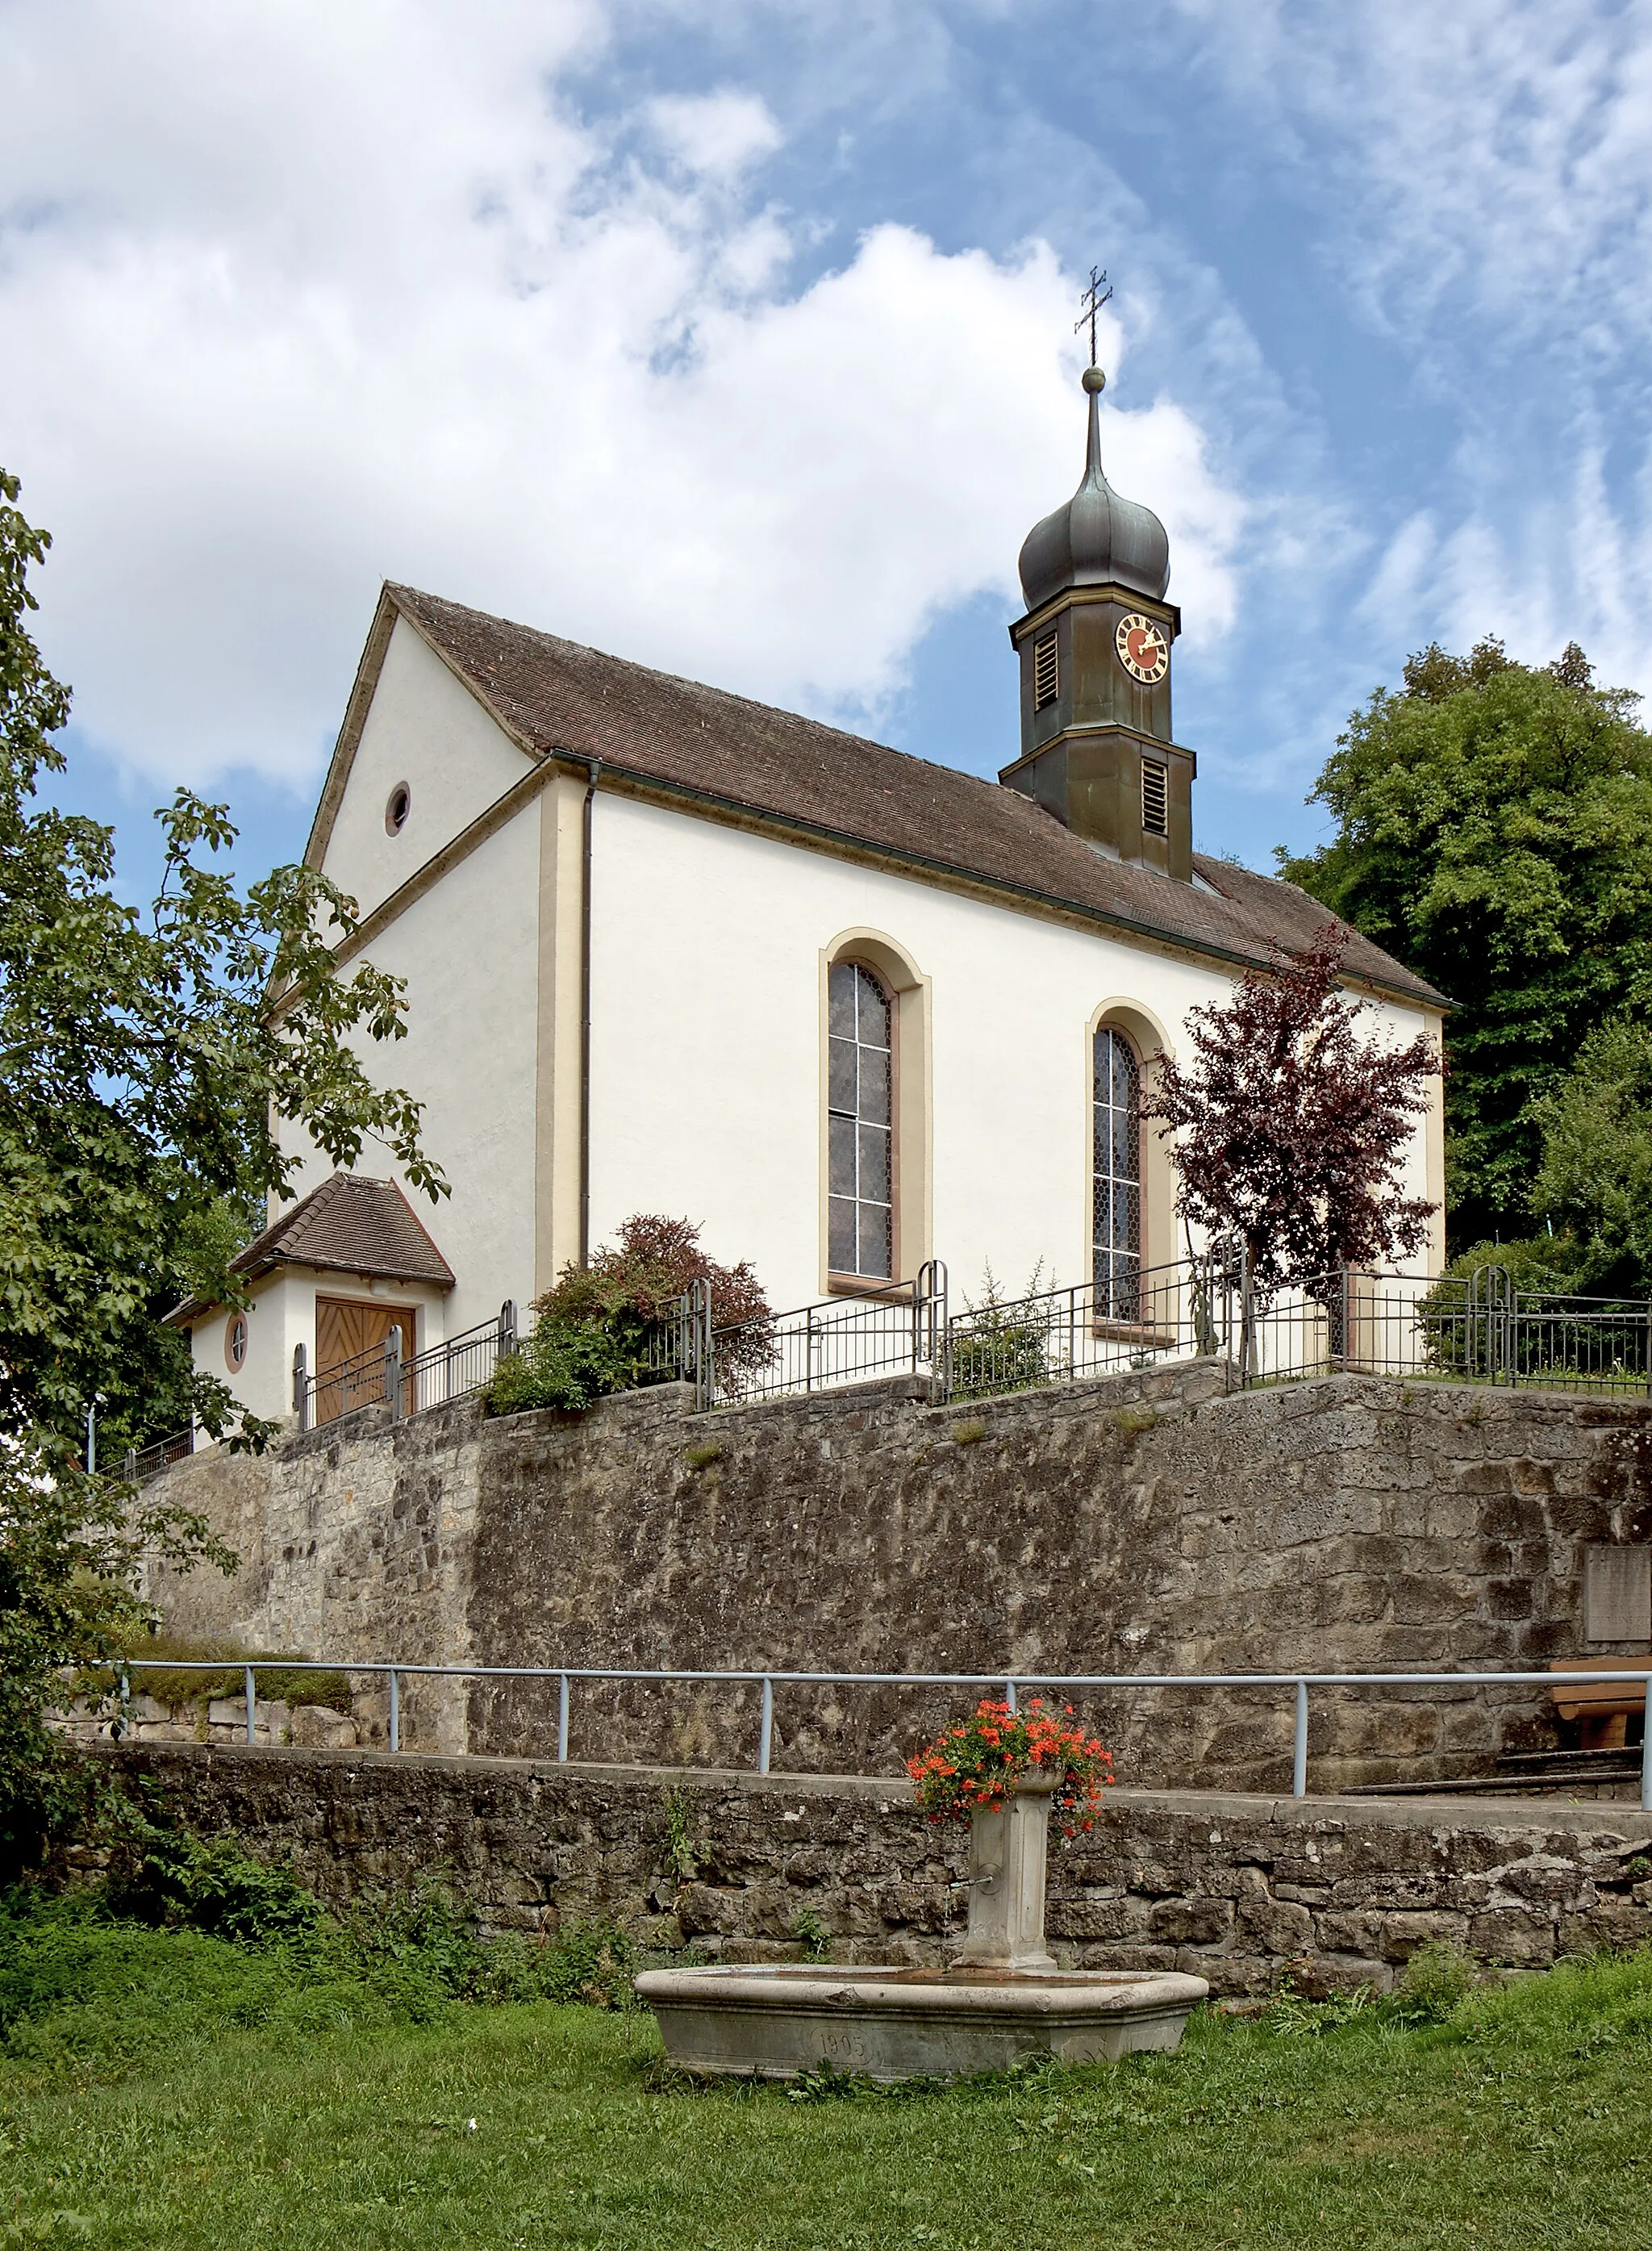 Photo showing: Catholic church St. Martin in Stühlingen-Grimmelshofen, Germany. The church was built in the second half of the 17th century.